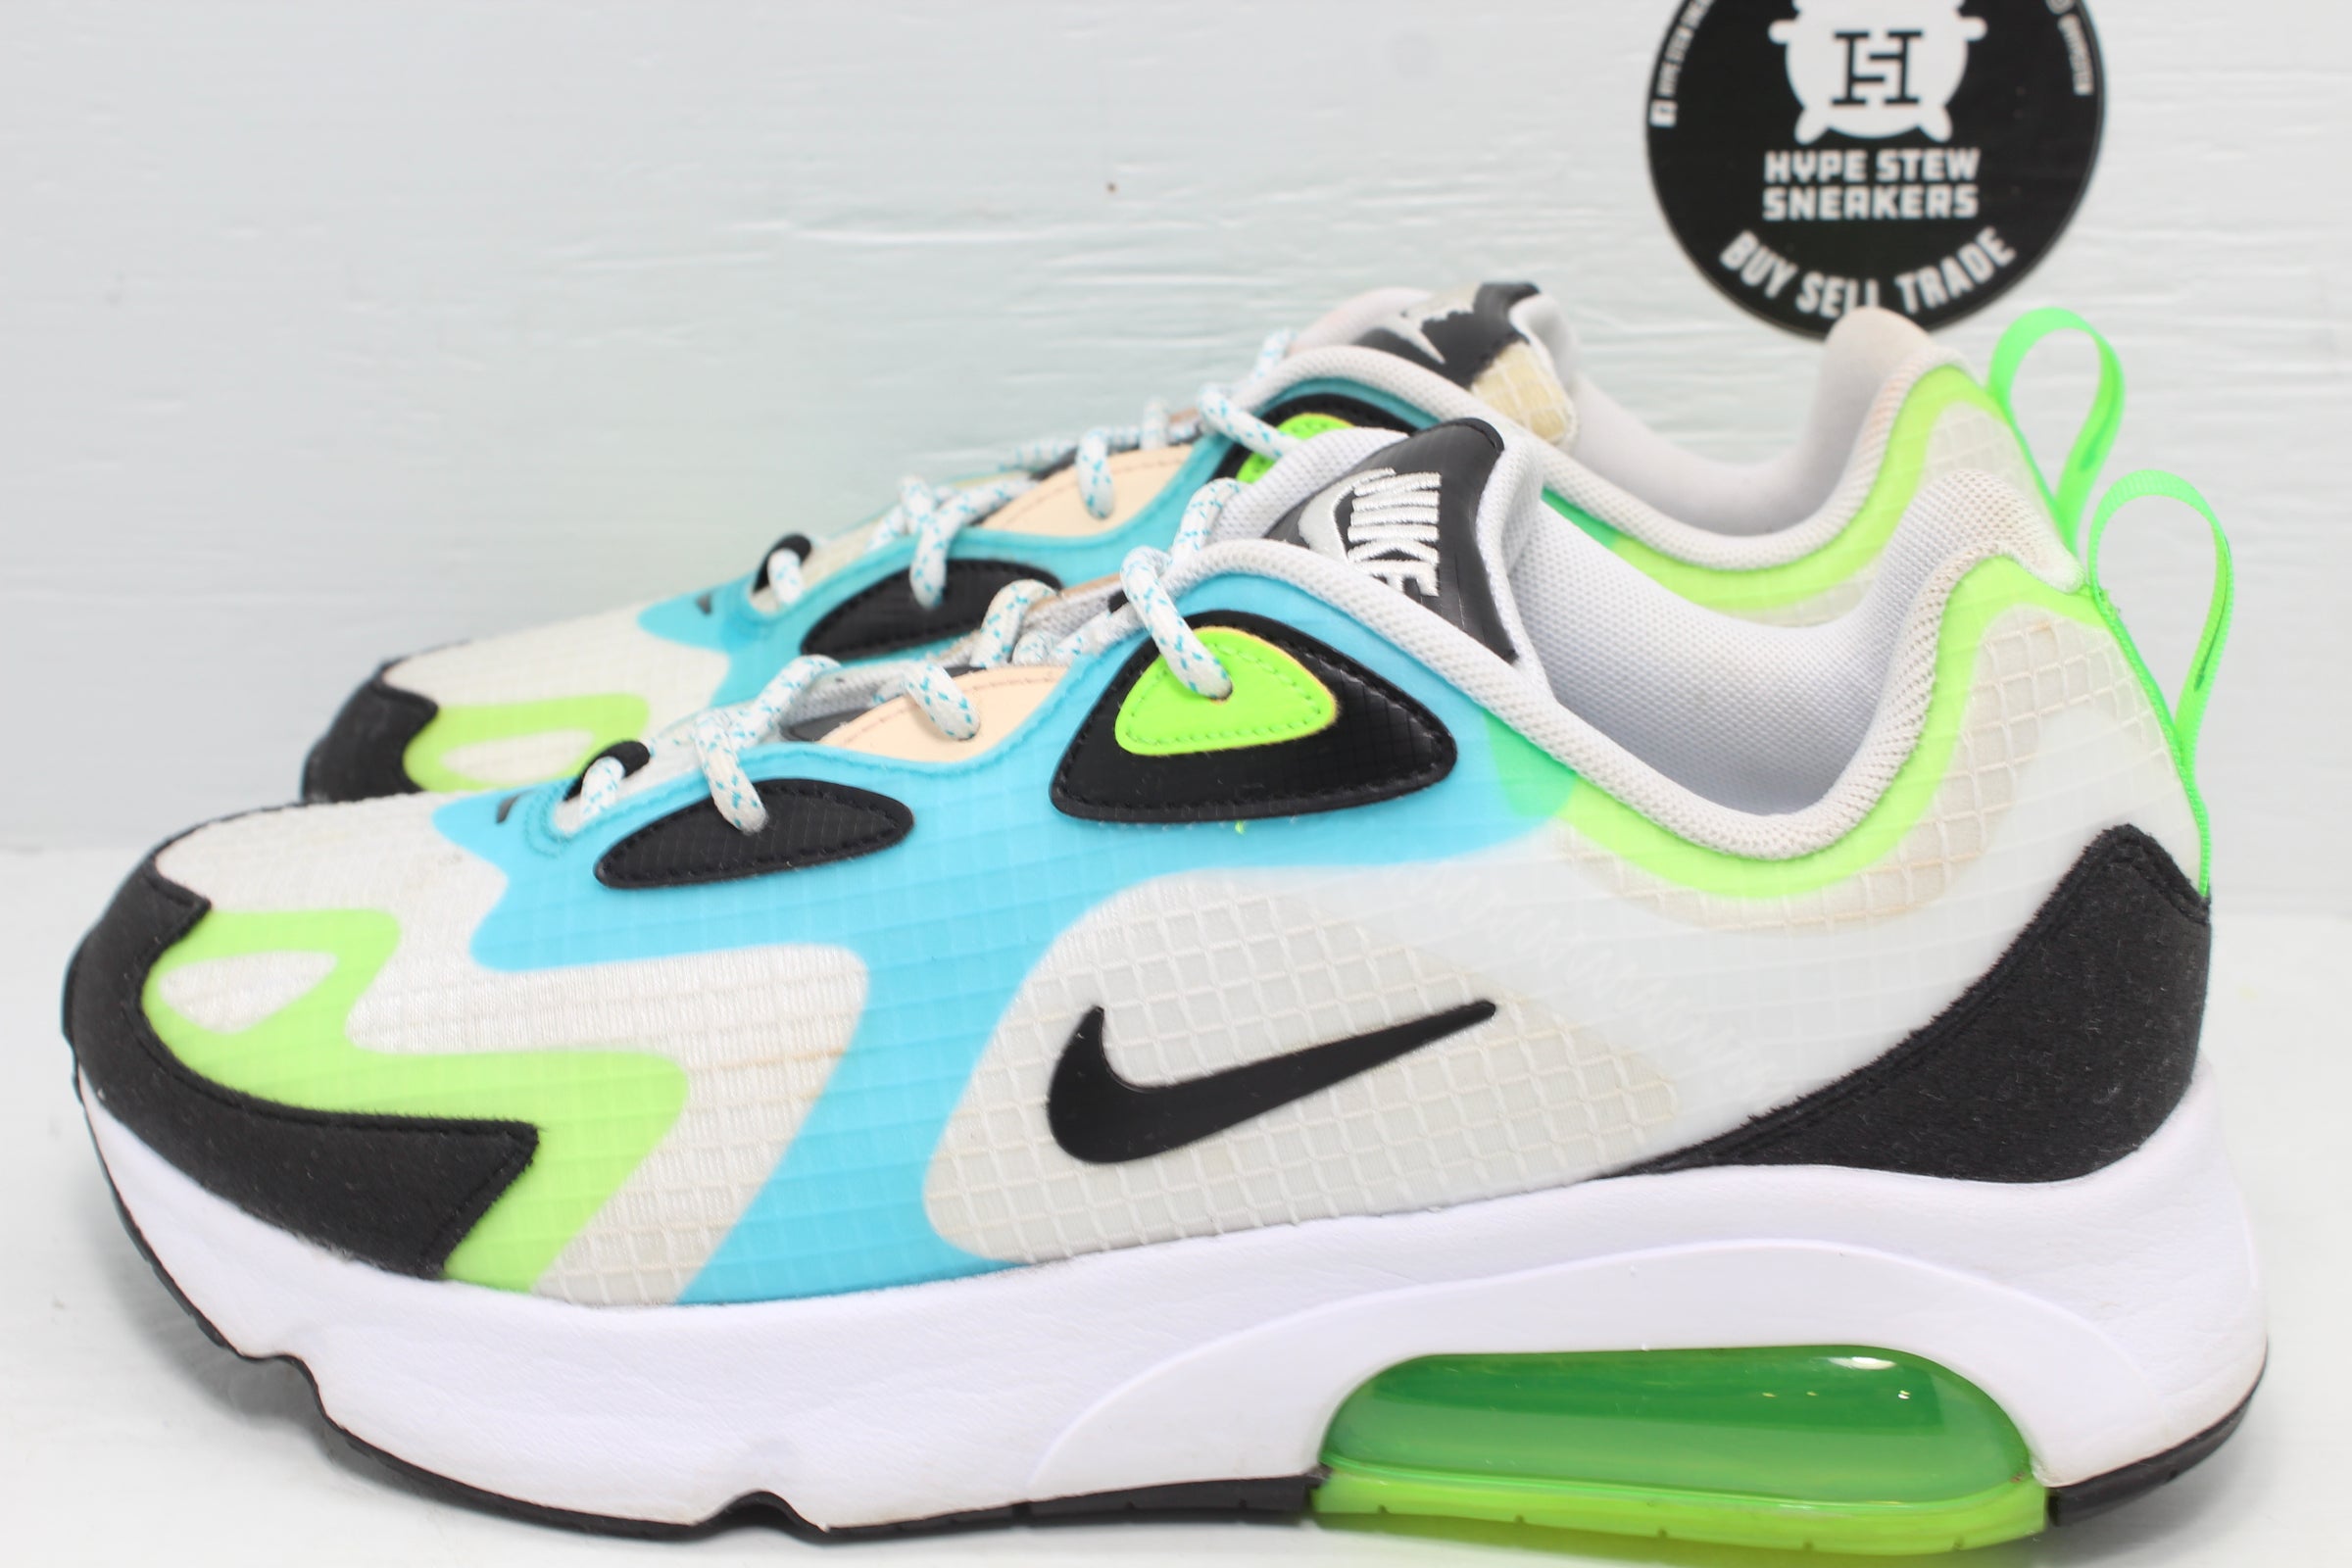 Nike Air Max White Electric Oracle | Hype Stew Detroit